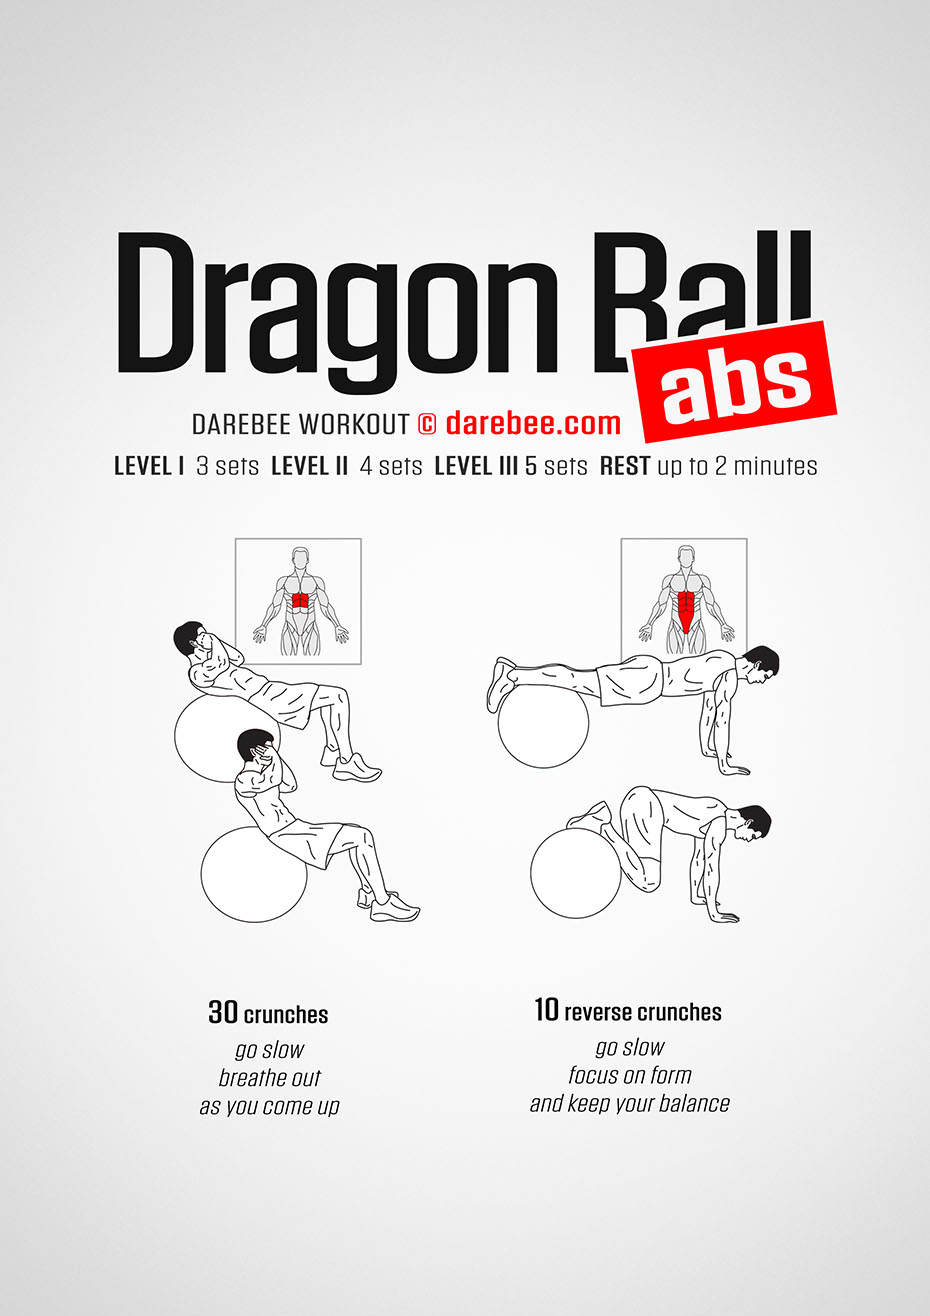 Dragon Ball Abs is a self-explanatory Darebee home-fitness workout.